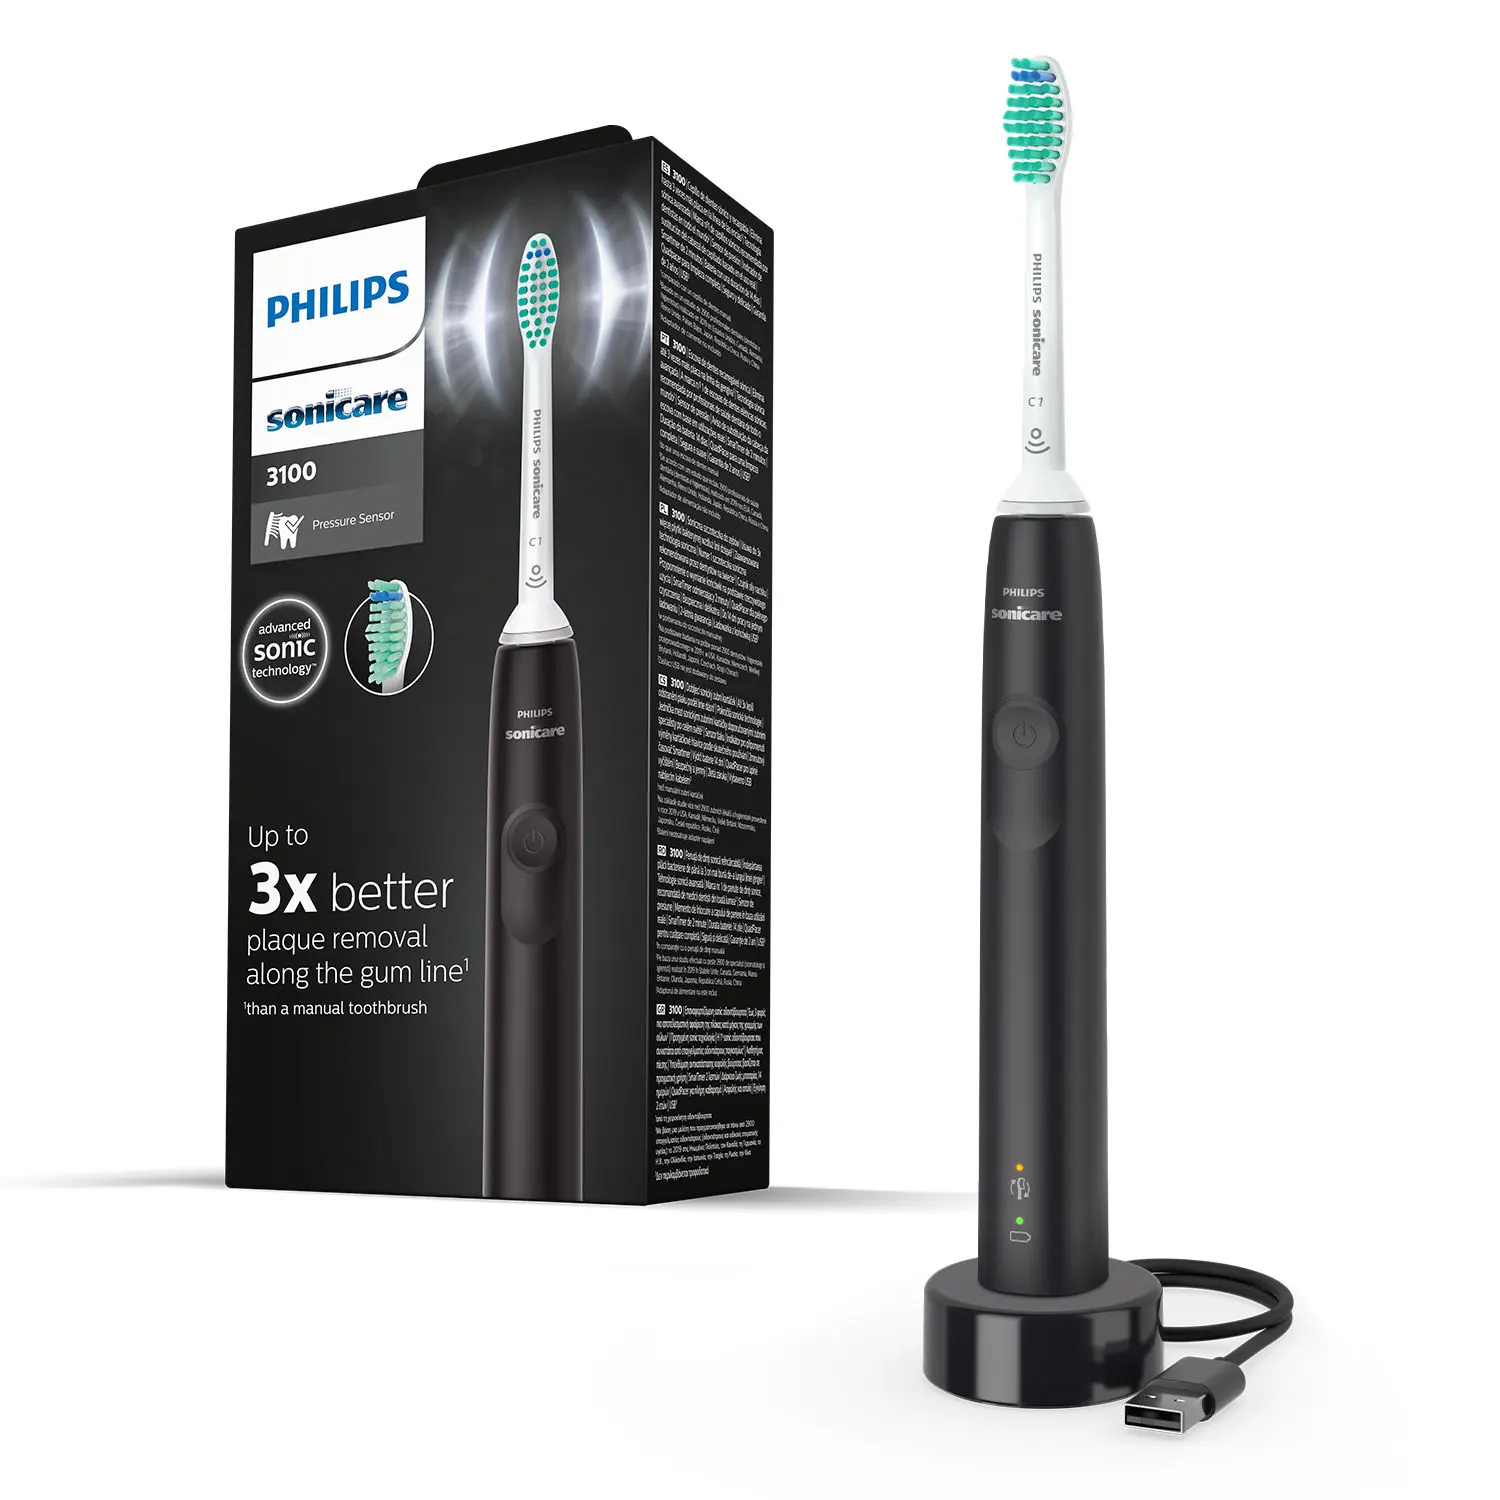 Philips Sonicare Electric Toothbrush - Galway 3100 Series. Built in pressure sensor, Easy Start tech, Dual Intensity Quad Pacer , 2 minute smart timer. HX3671/14